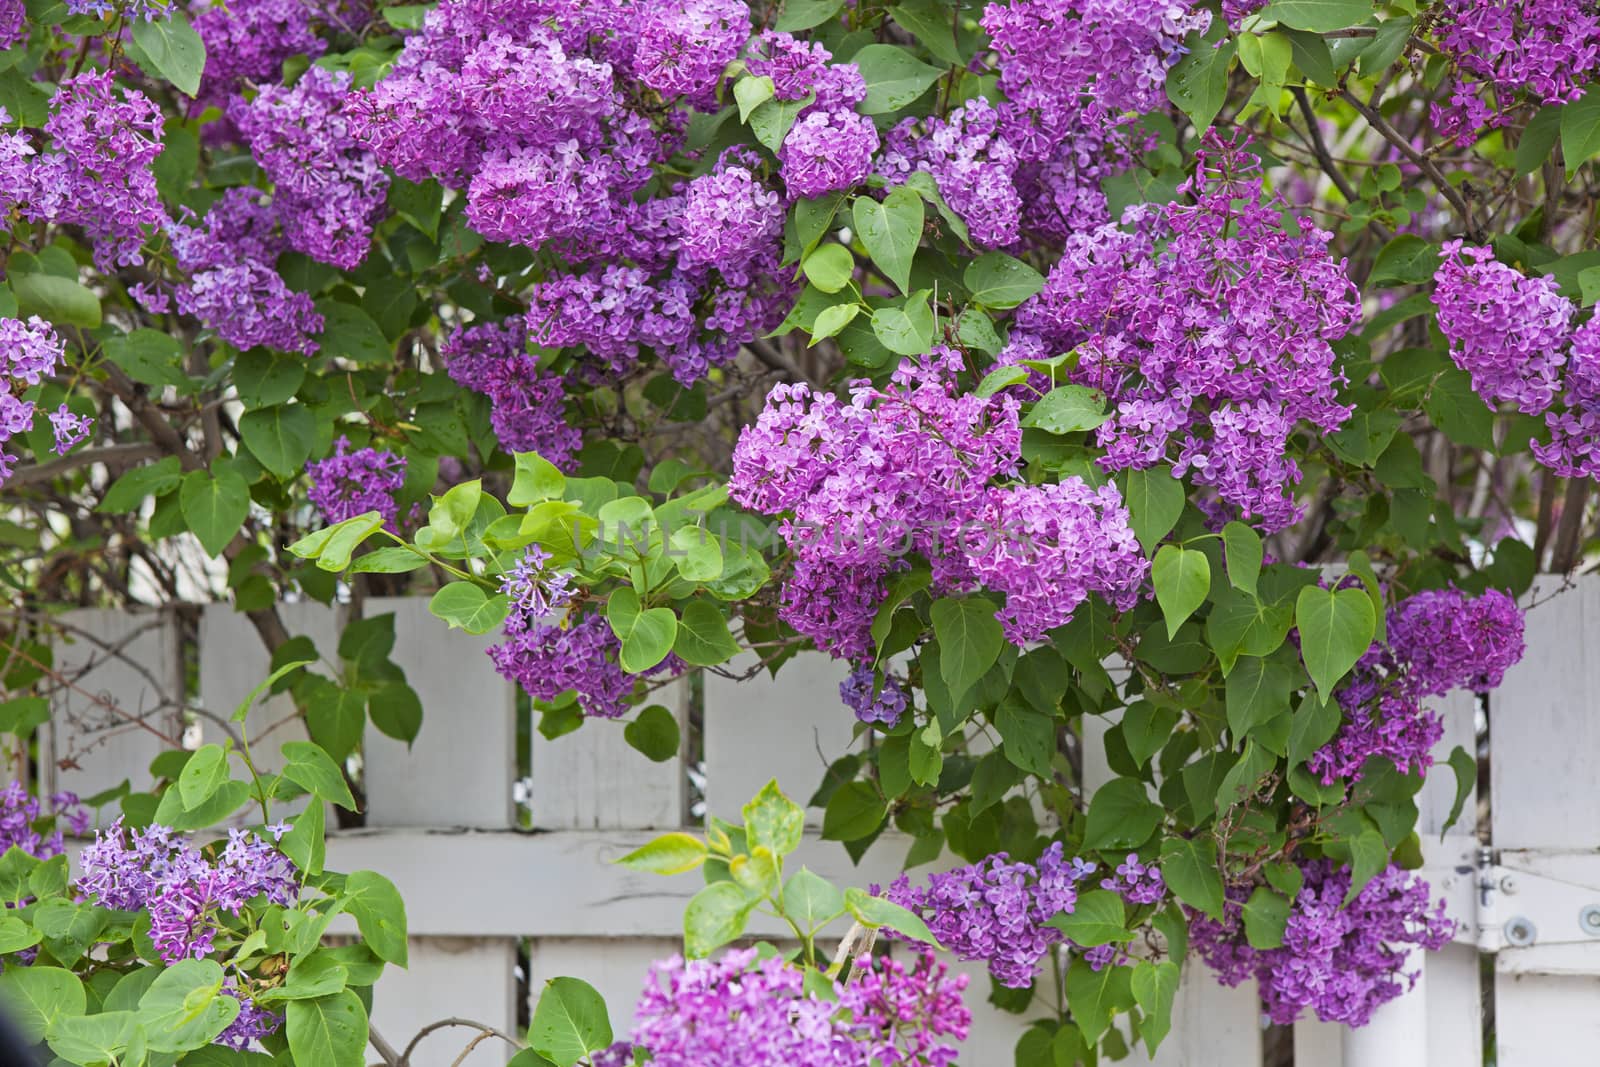 A large lilac bush in full bloom shades a white fence.